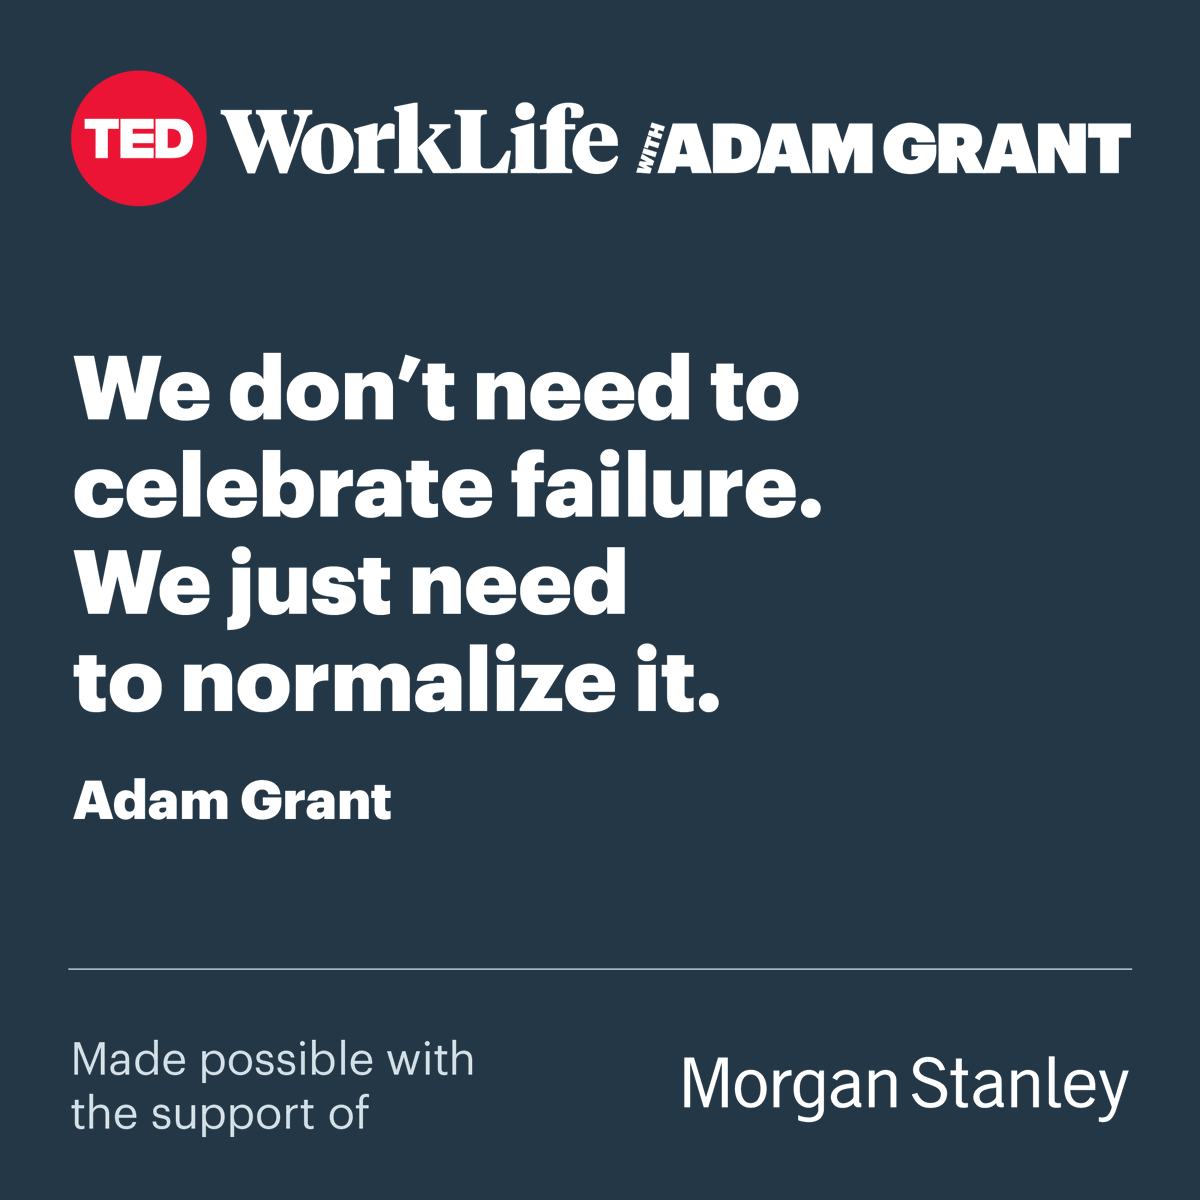 Out now! This enlightening & entertaining first episode of WorkLife S4. I loved co-creating this with @AdamMGrant @TEDTalks and @transmitterpods. Listen to learn why we end up doubling down on bad decisions — and how to change that pattern. open.spotify.com/episode/0OByfP…